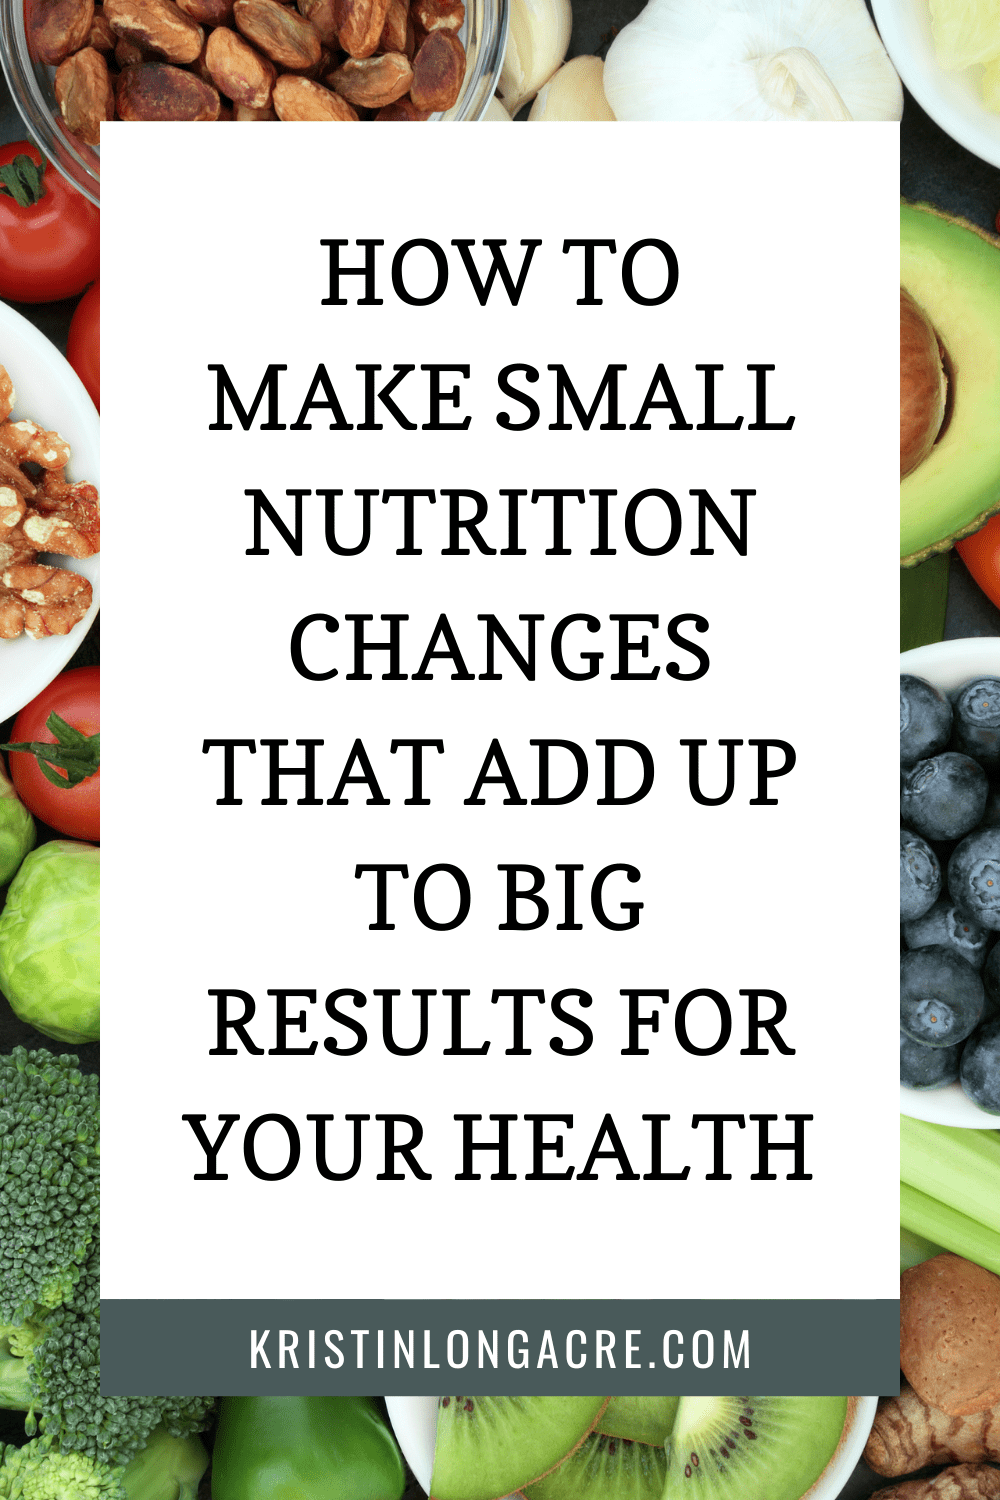 How To Make Small Nutrition Changes